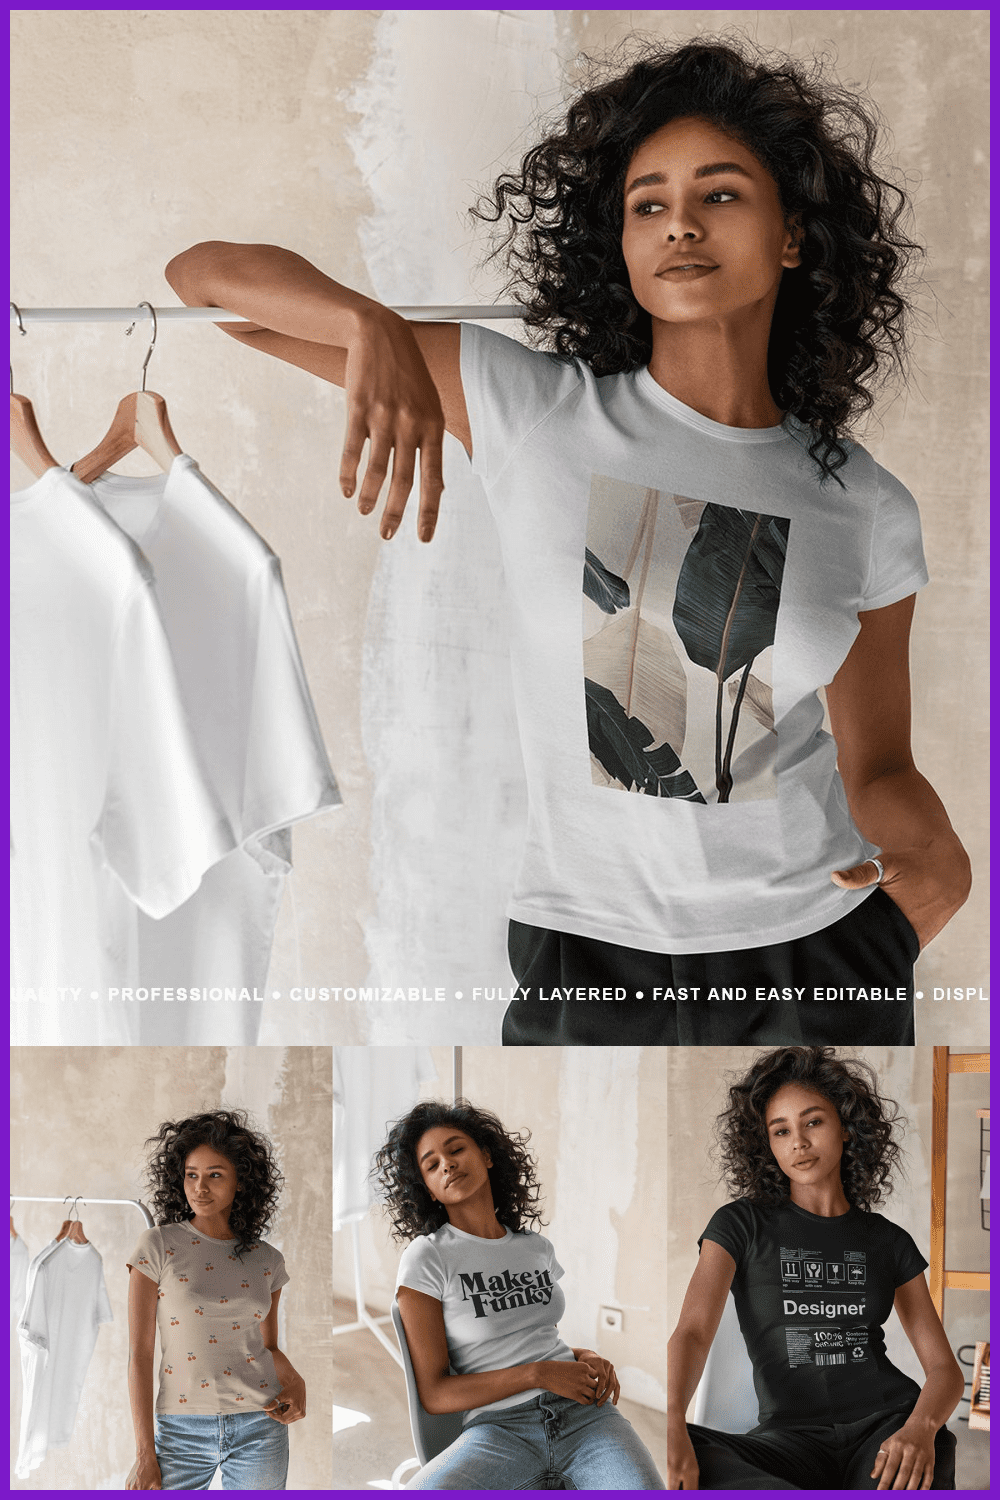 Collage of photos of a girl in different t-shirts with designer prints.